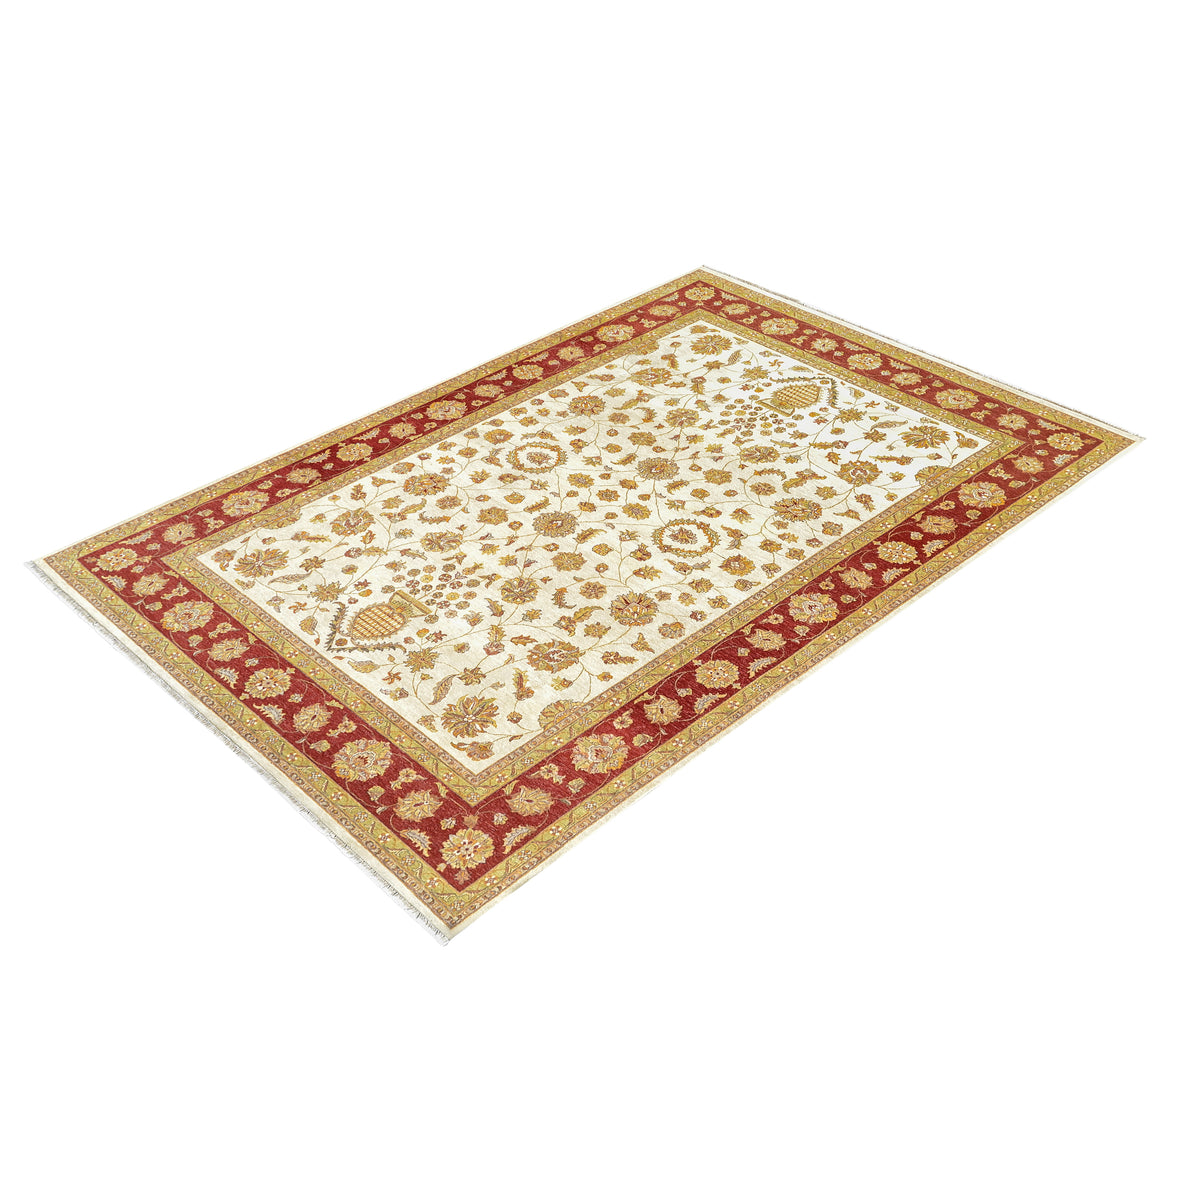 Fine Hand-knotted Wool Rug 301cm x 437cm